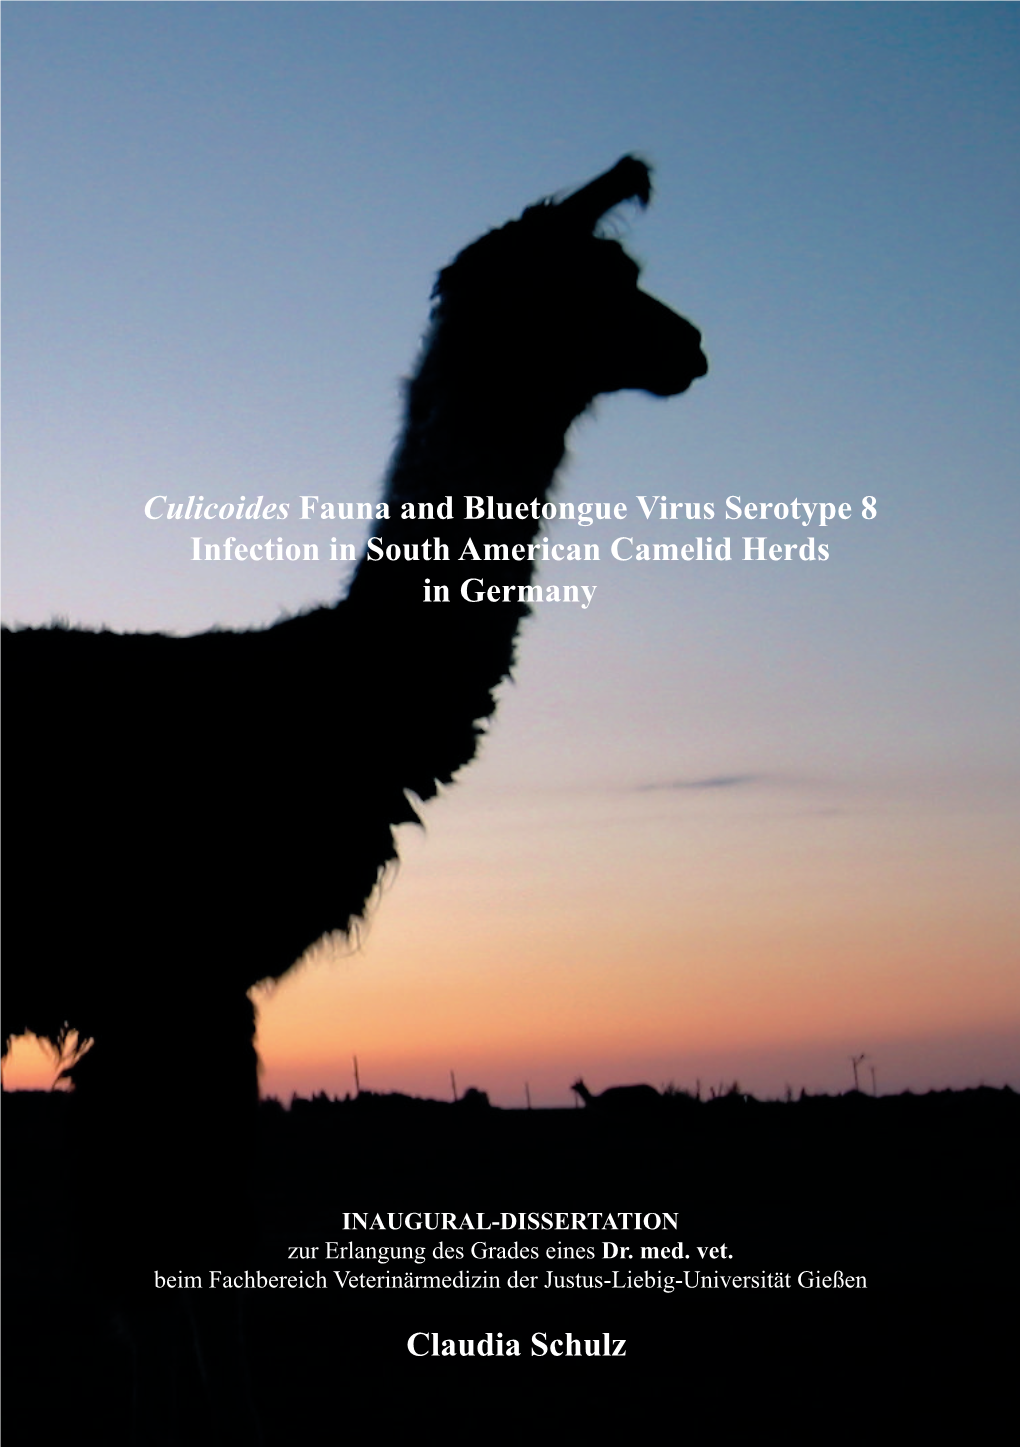 Culicoides Fauna and Bluetongue Virus Serotype 8 Infection in South American Camelid Herds in Germany